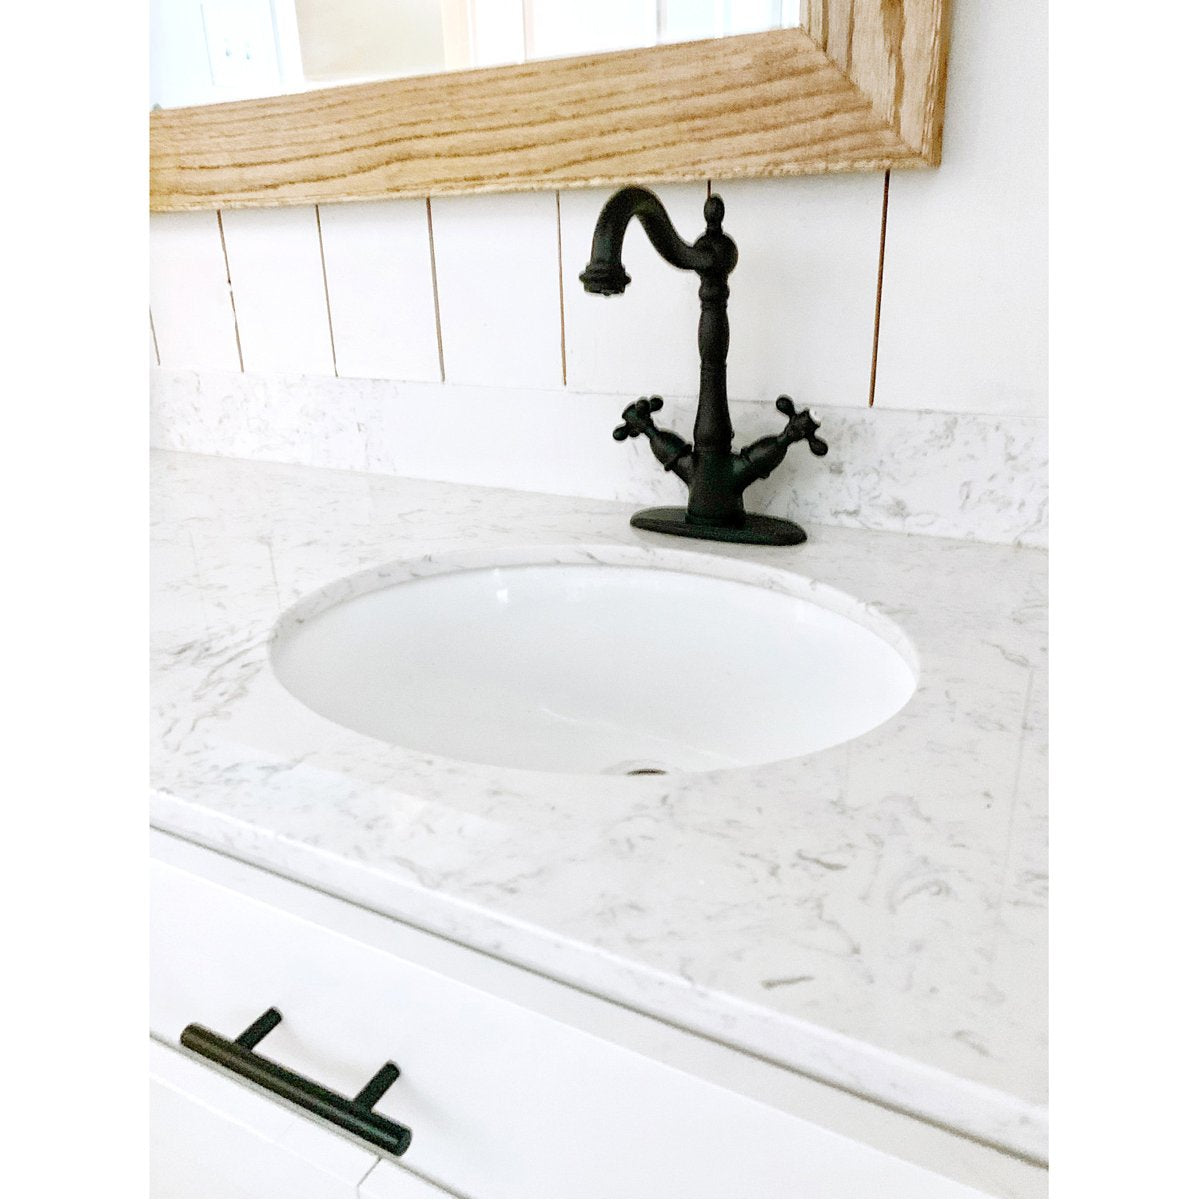 Kingston Brass Heritage 4-Inch Centerset Bathroom Faucet with Pop-Up Drain